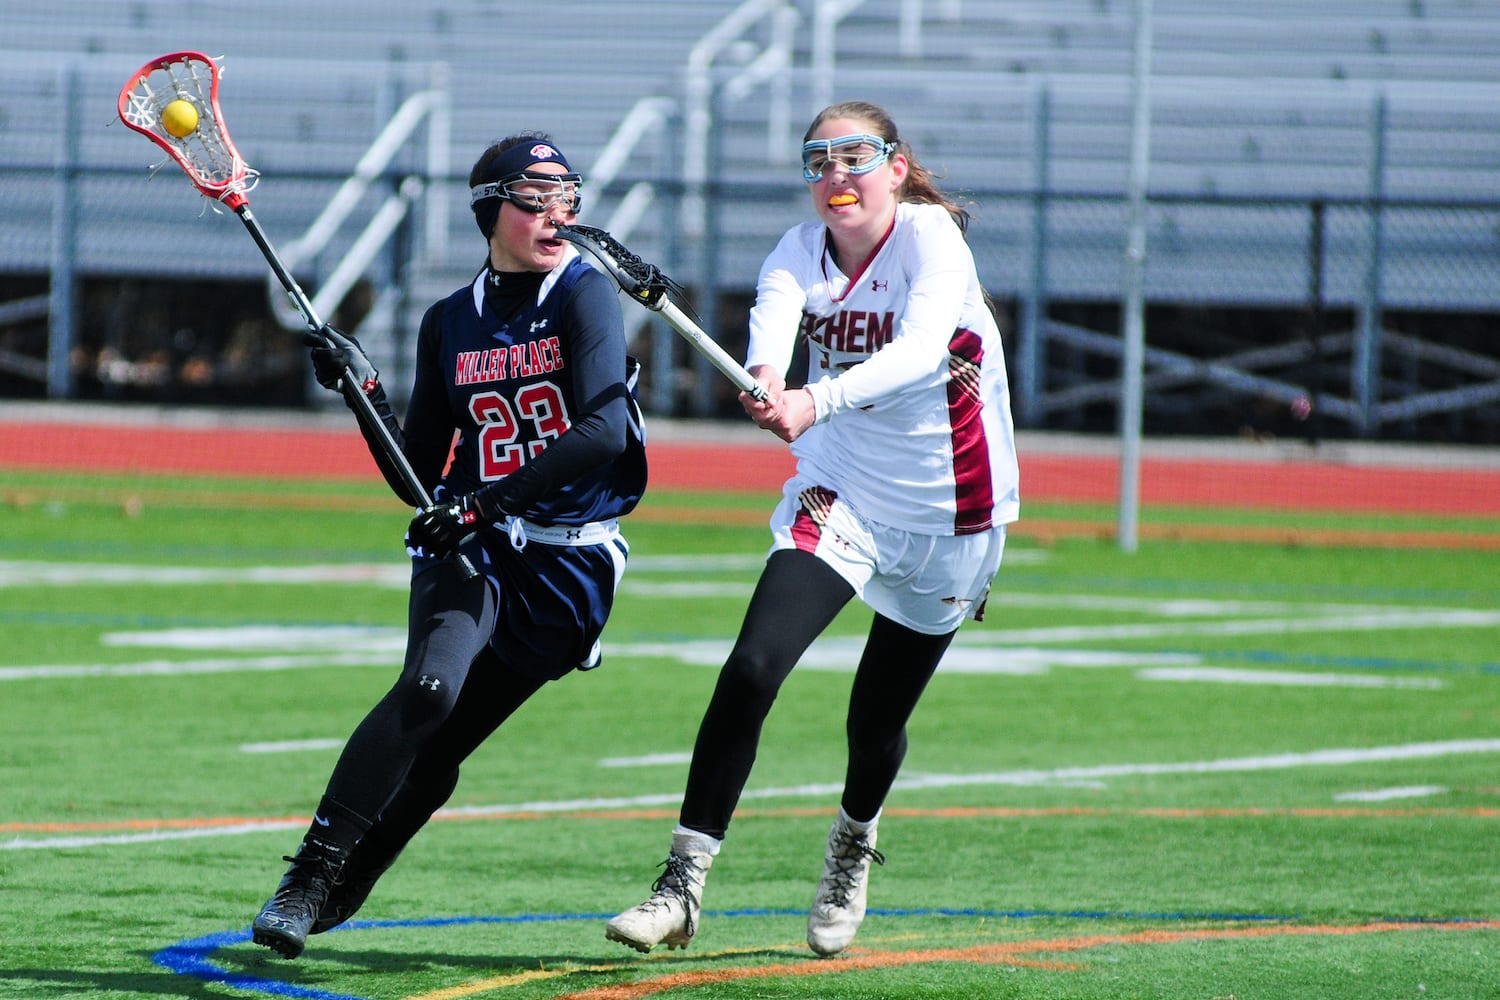 miller-place-panthers-fall-to-sachem-east-flaming-arrows-tbr-news-media